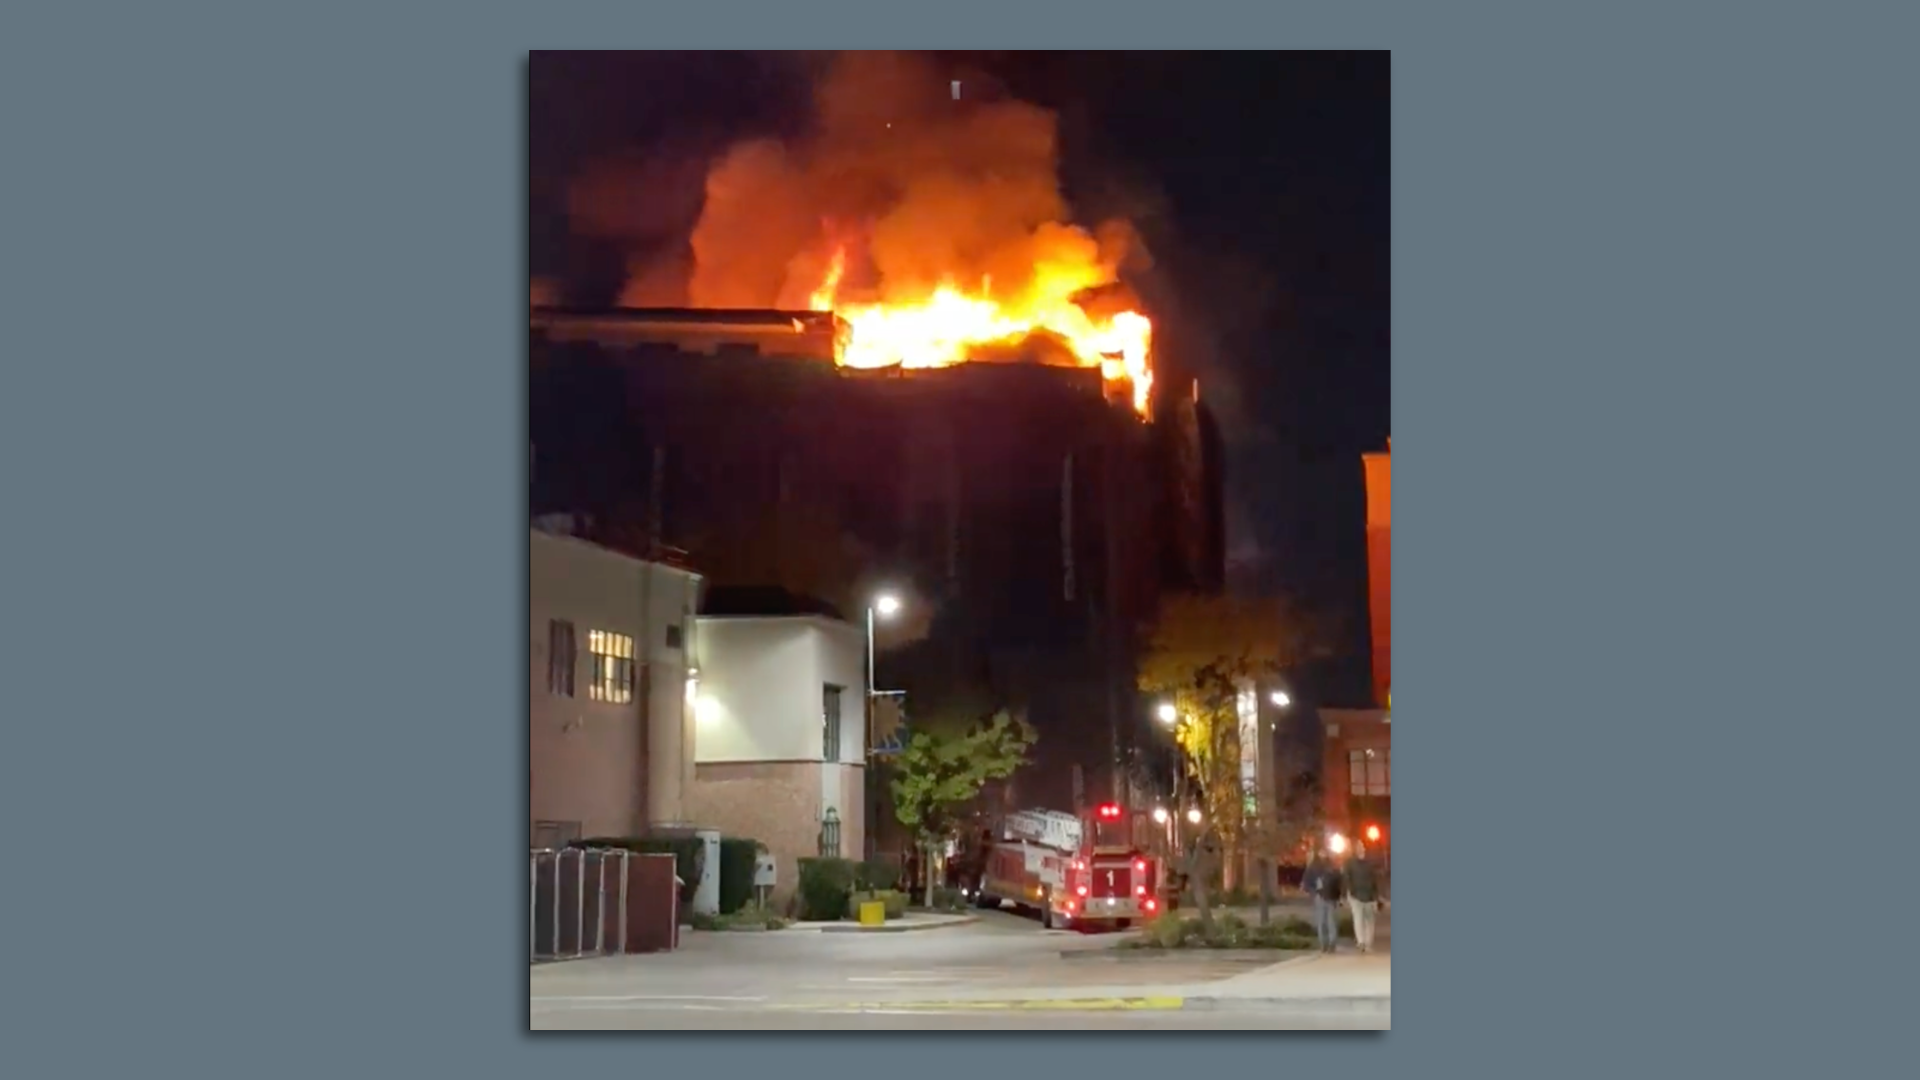 A huge fire burns at night in a large building on a city street with fire trucks.